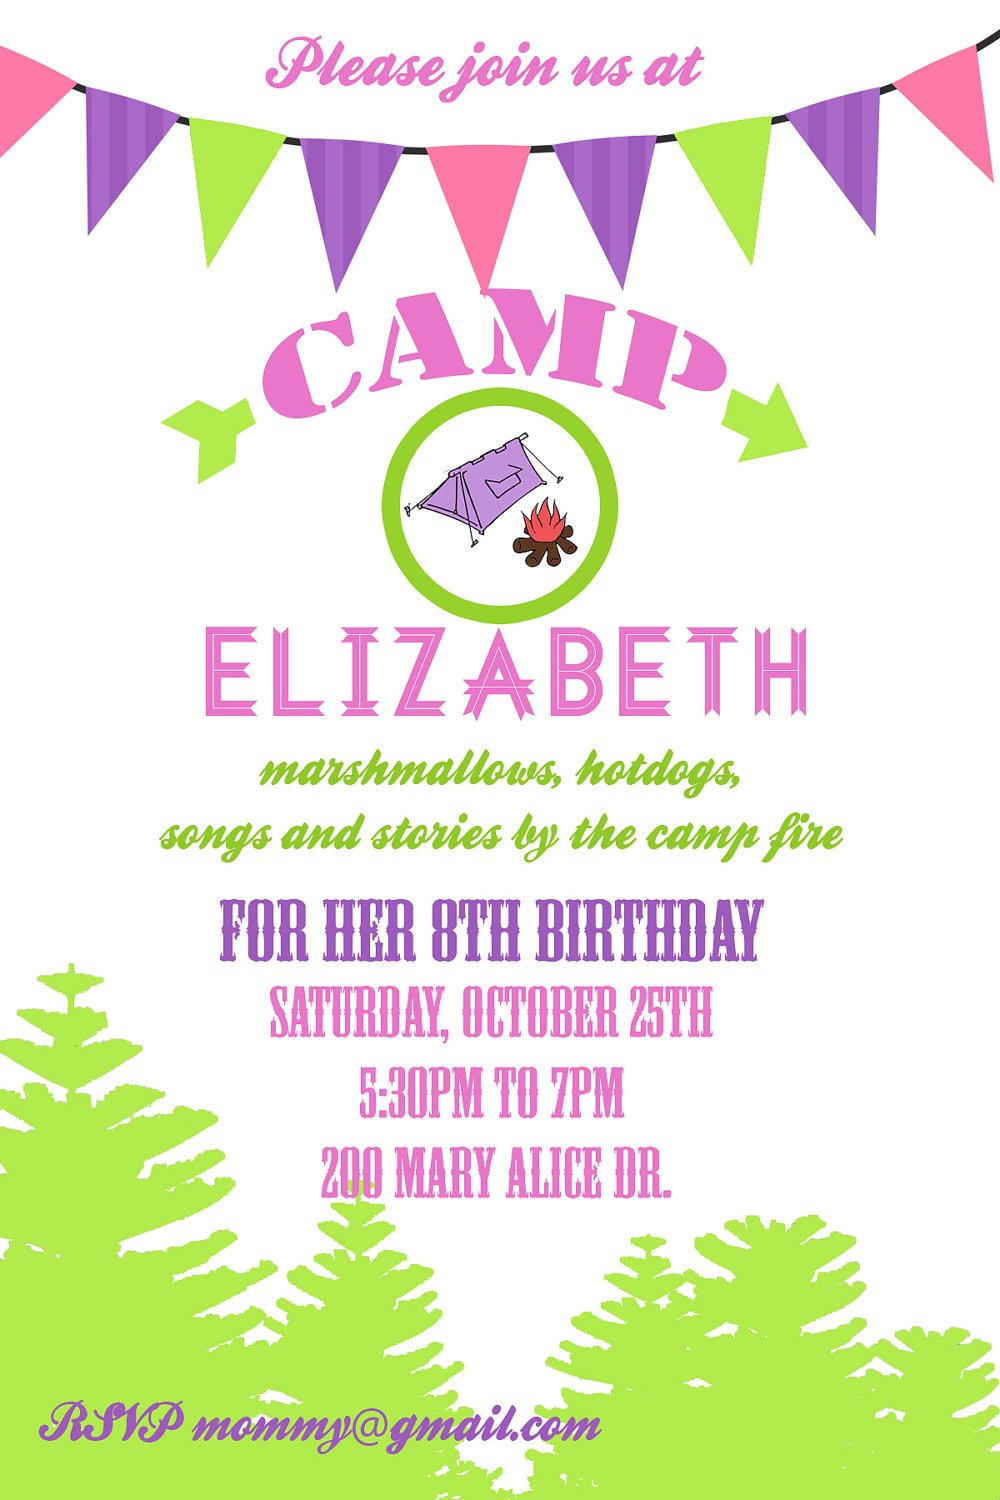 Camping Party Invitation